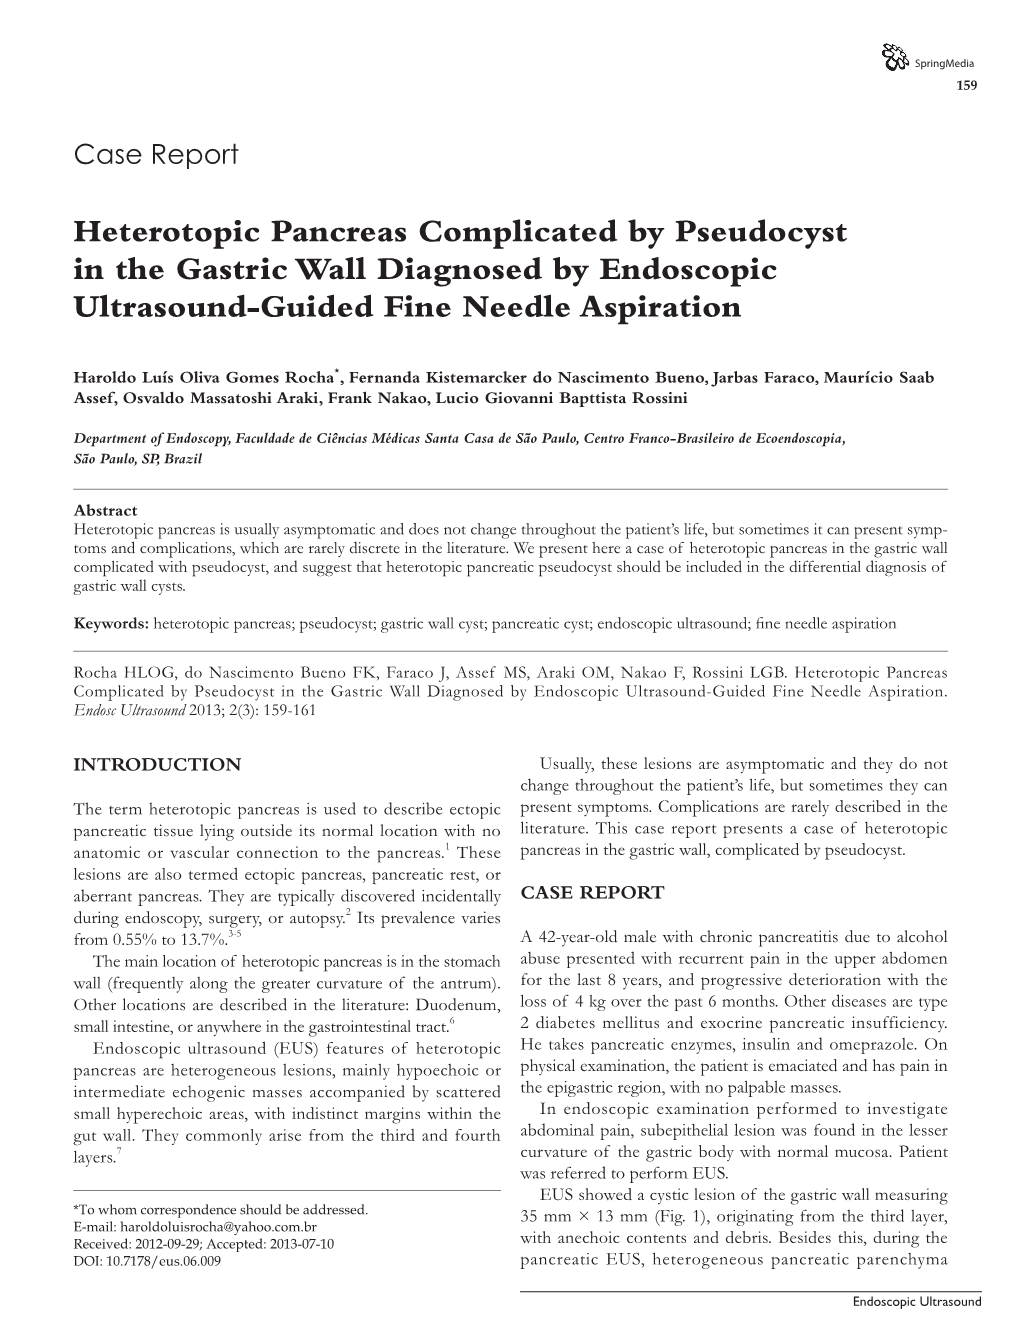 Heterotopic Pancreas Complicated by Pseudocyst in the Gastric Wall Diagnosed by Endoscopic Ultrasound-Guided Fine Needle Aspiration